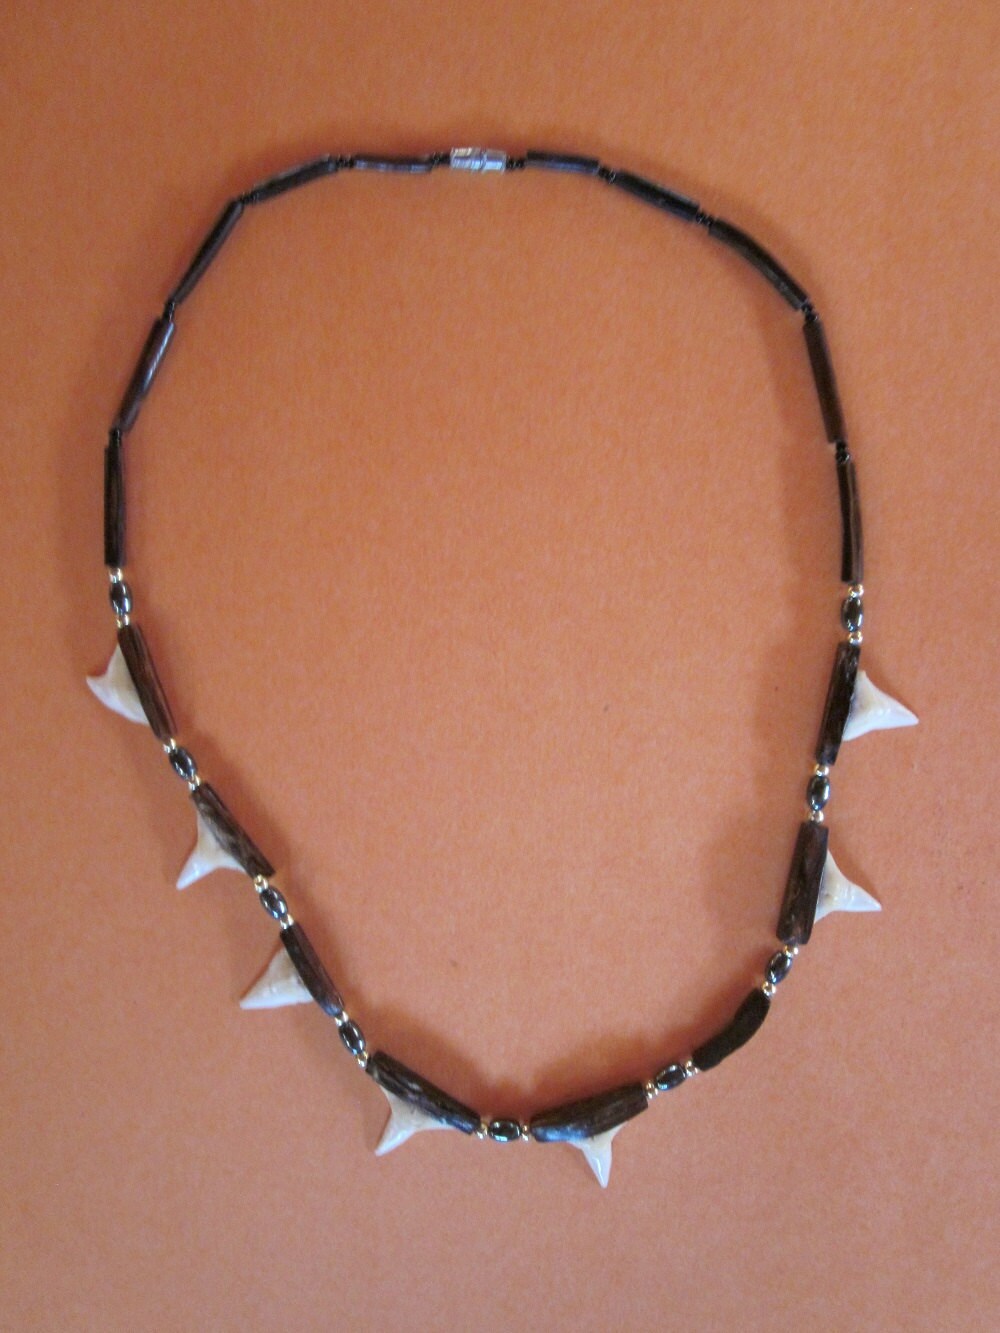 Shark Tooth Beads on Beaded Necklace with Clasp One Tooth